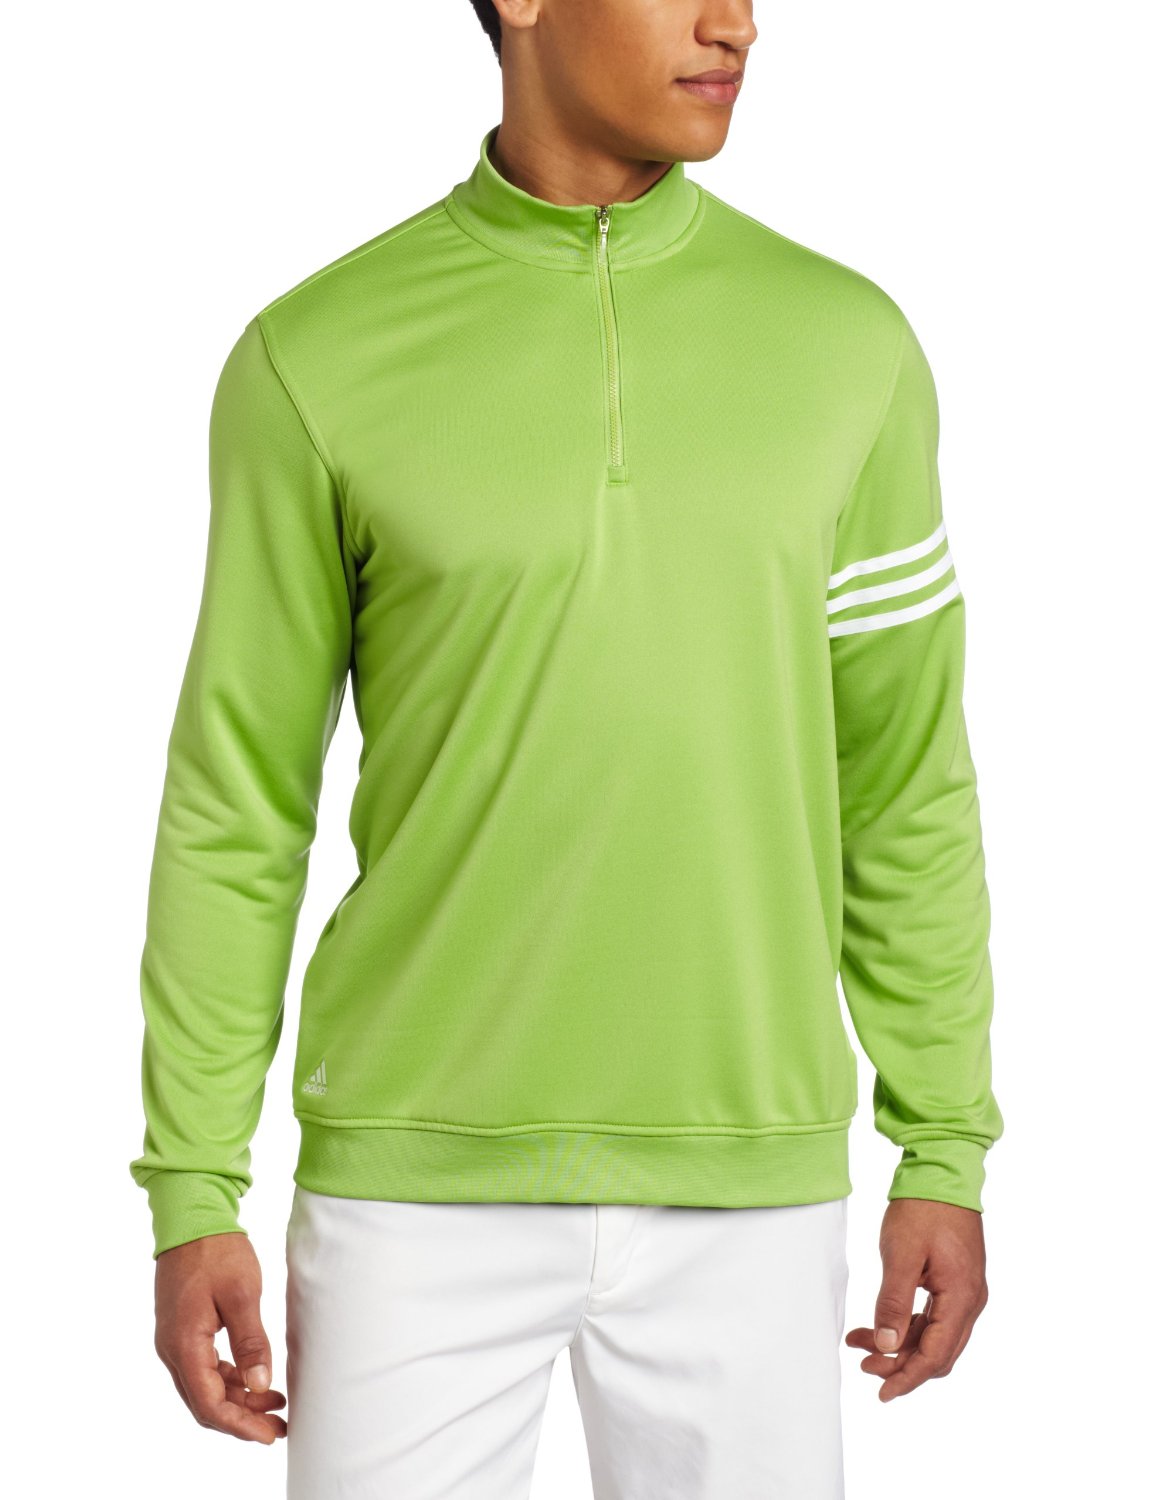 Mens Adidas Climalite 3-Stripes Golf Pullovers